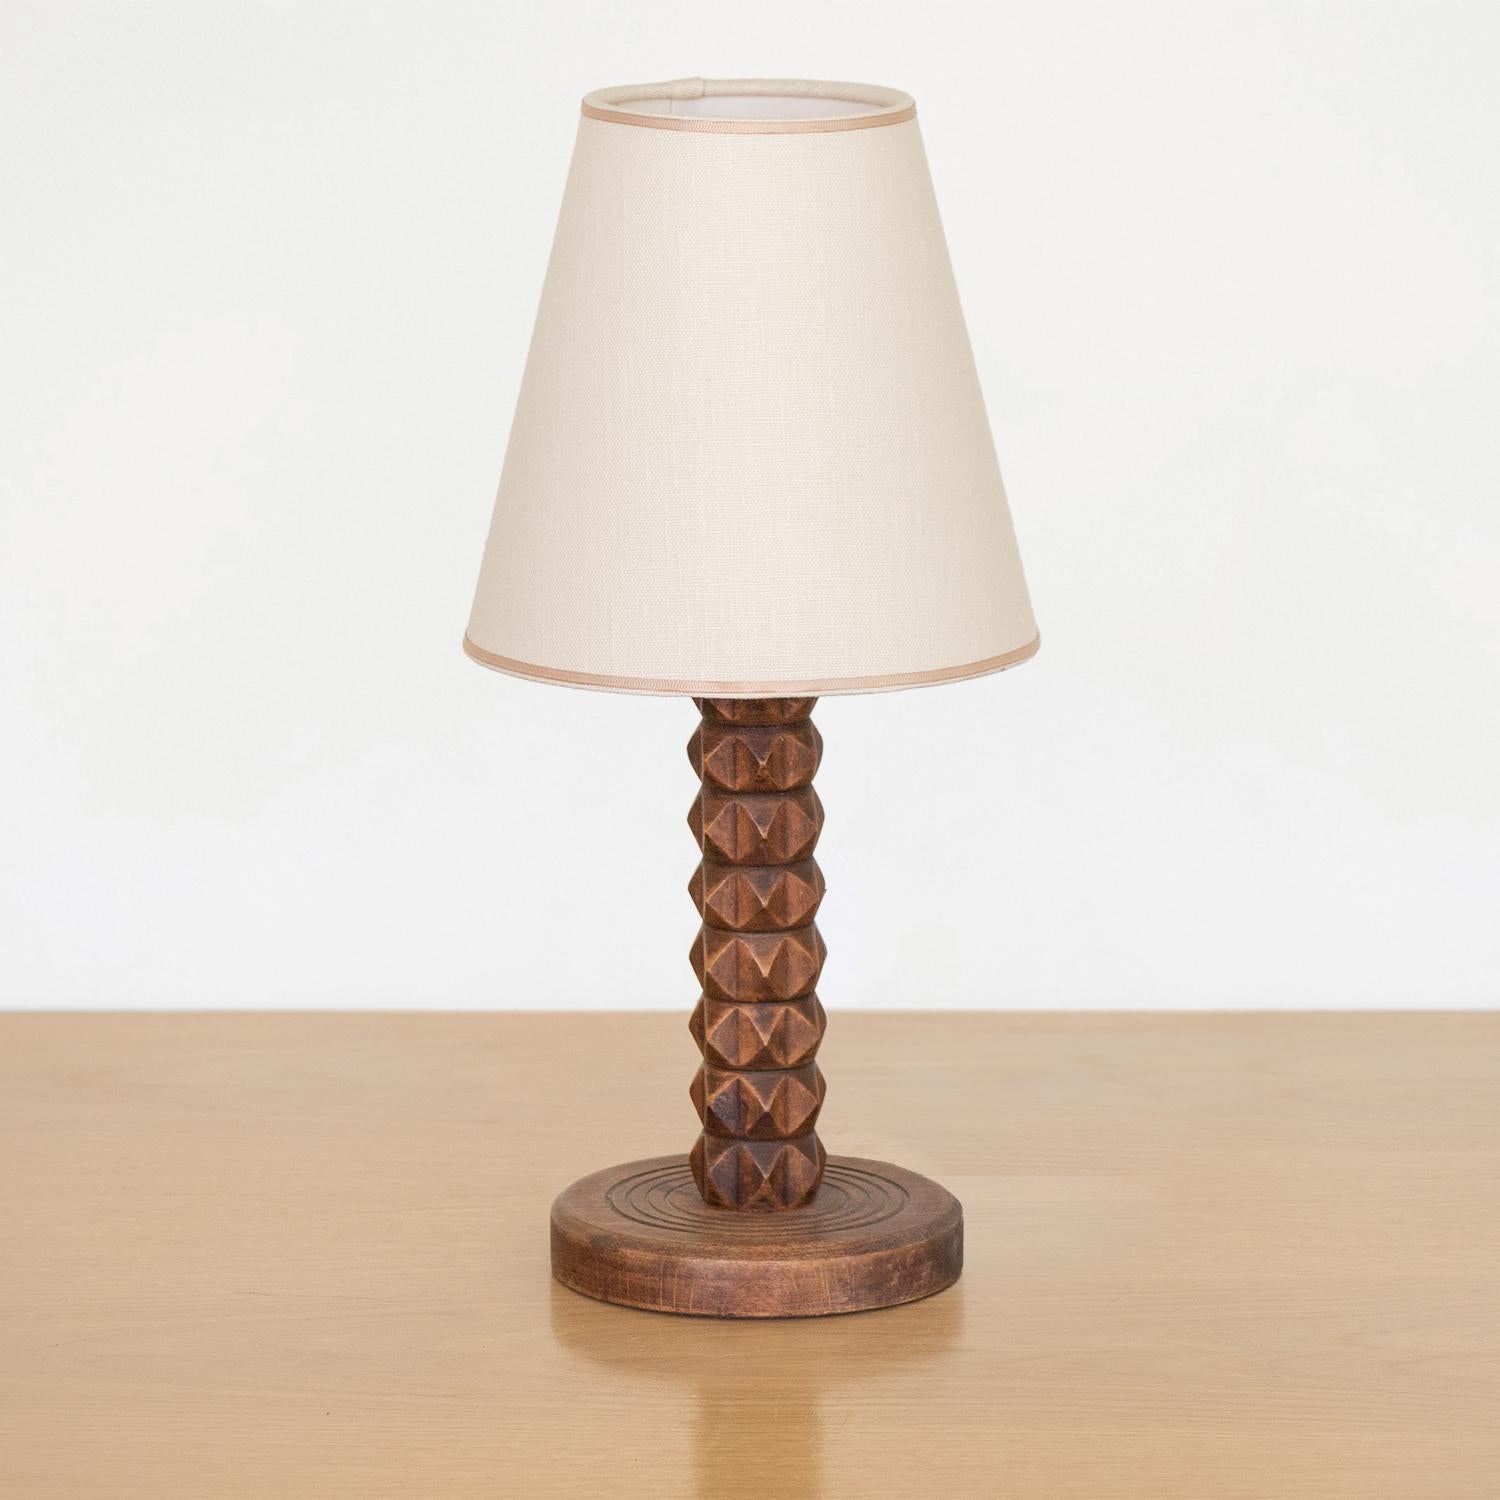 Small carved wood table lamp from France, 1940s. Beautiful carved chevron design with original dark wood finish. New linen shade with tan trim and newly re-wired.